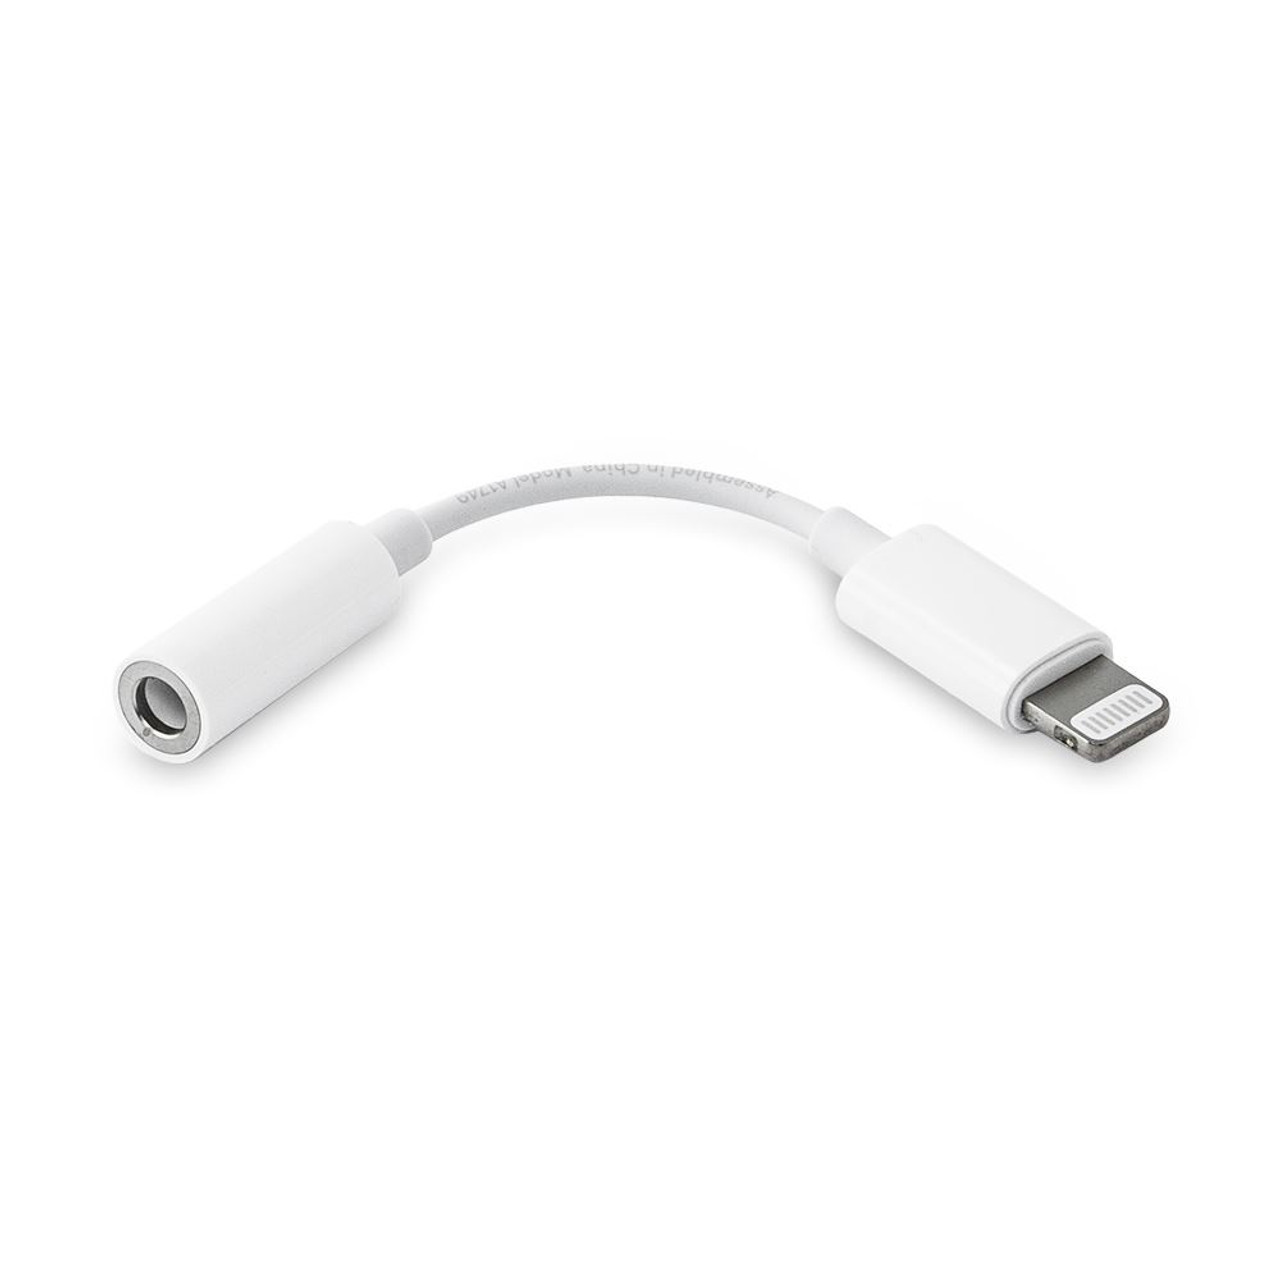 Genuine Original Official Apple Lightning Connector to  Headphone Jack  Adapter for iPhone X / 8 / 8 Plus / 7 / 7 Plus / 6s / 6s Plus / 6 / 6 Plus  / SE / 5s / 5 / iPad Pro / iPad Air 2 - MMX62ZM/A (Bulk Packed)